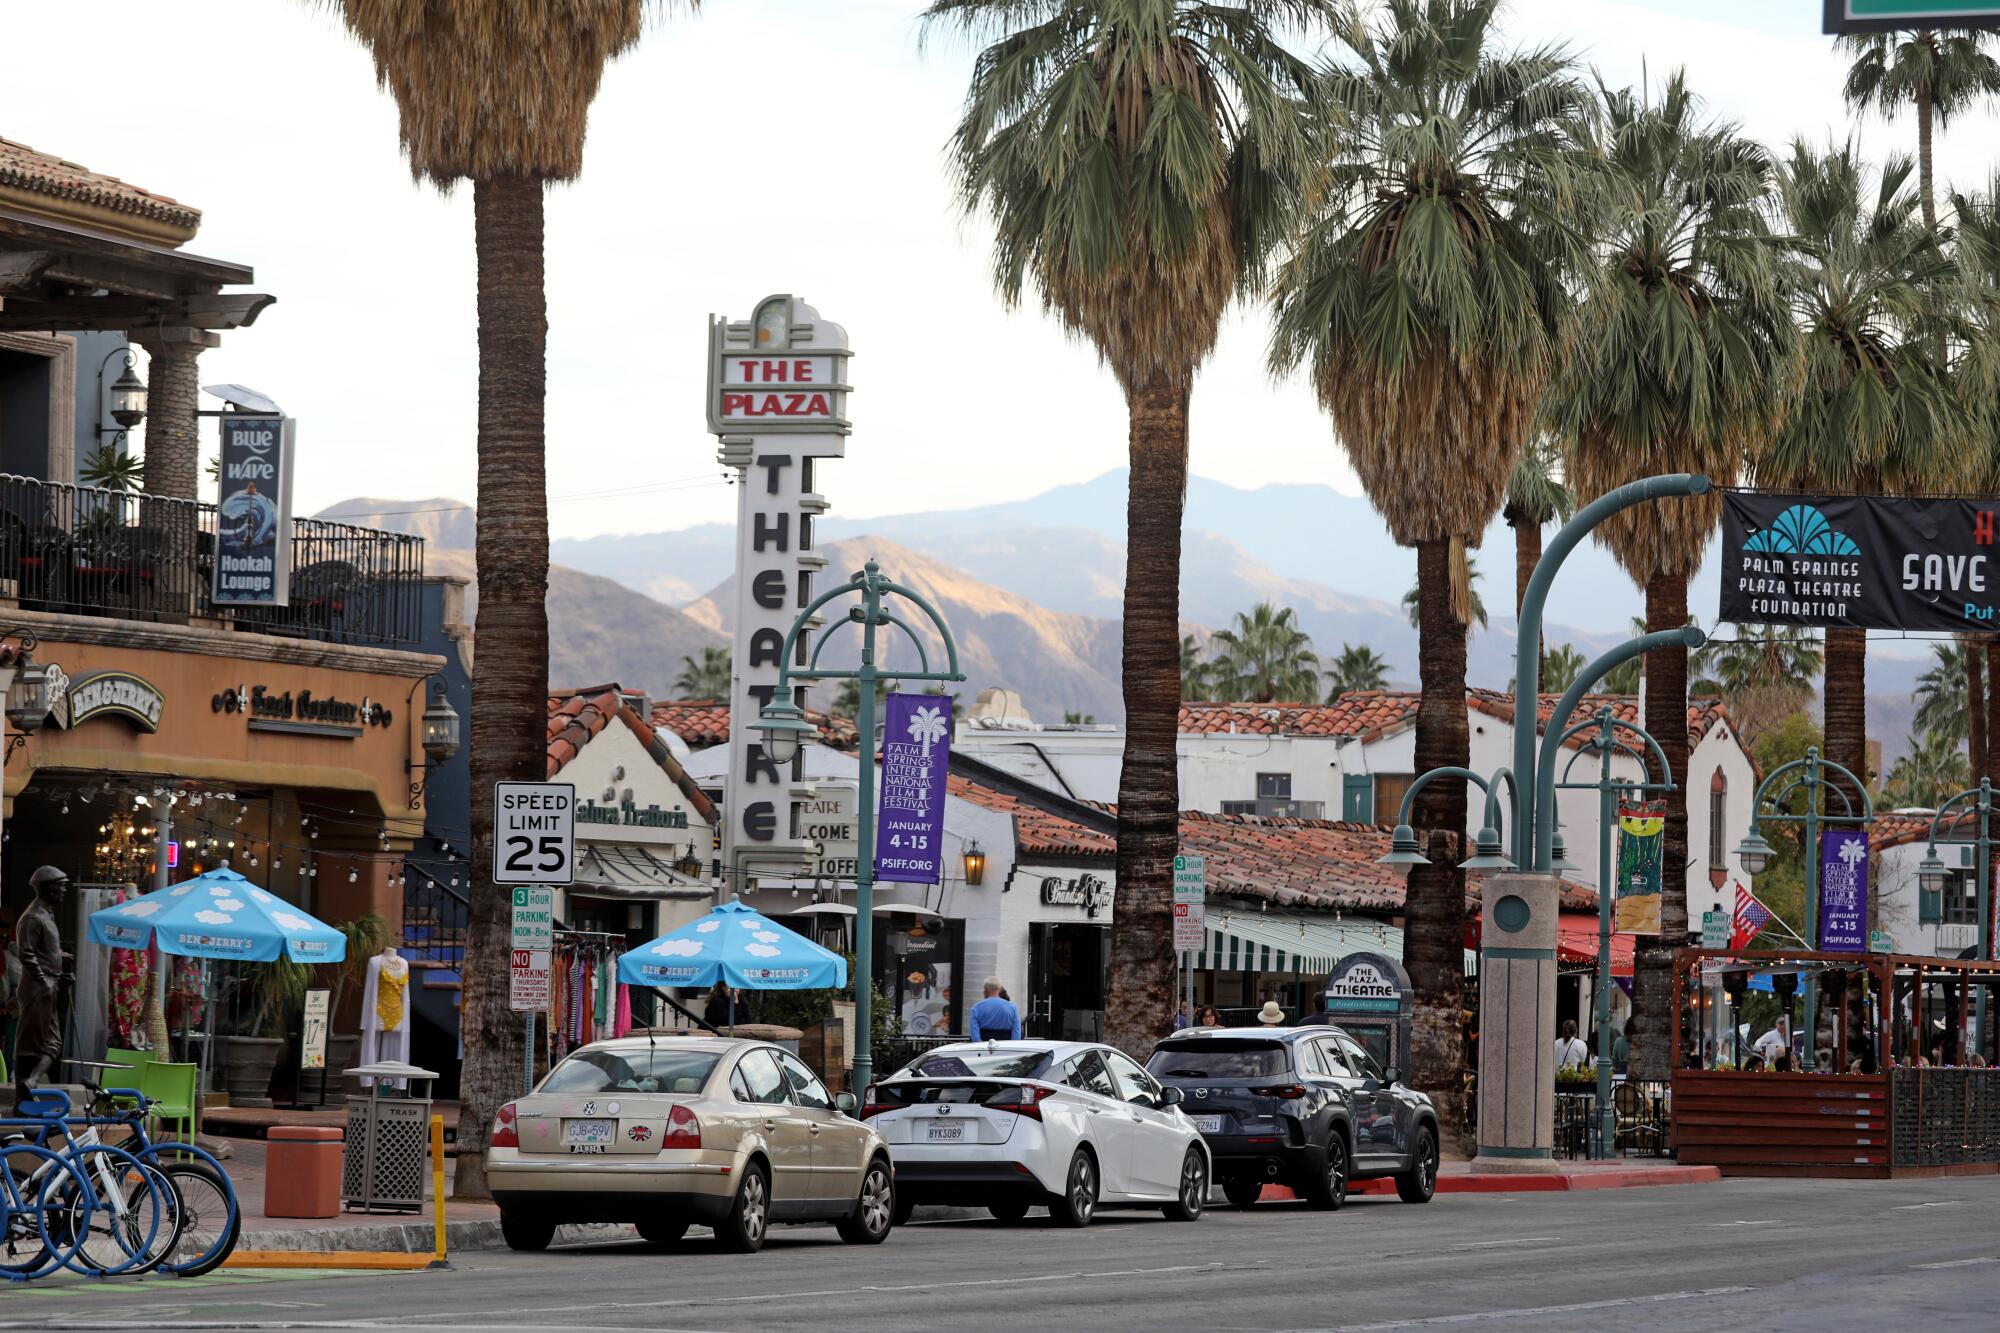 A scene from Palm Canyon Drive in downtown Palm Springs.